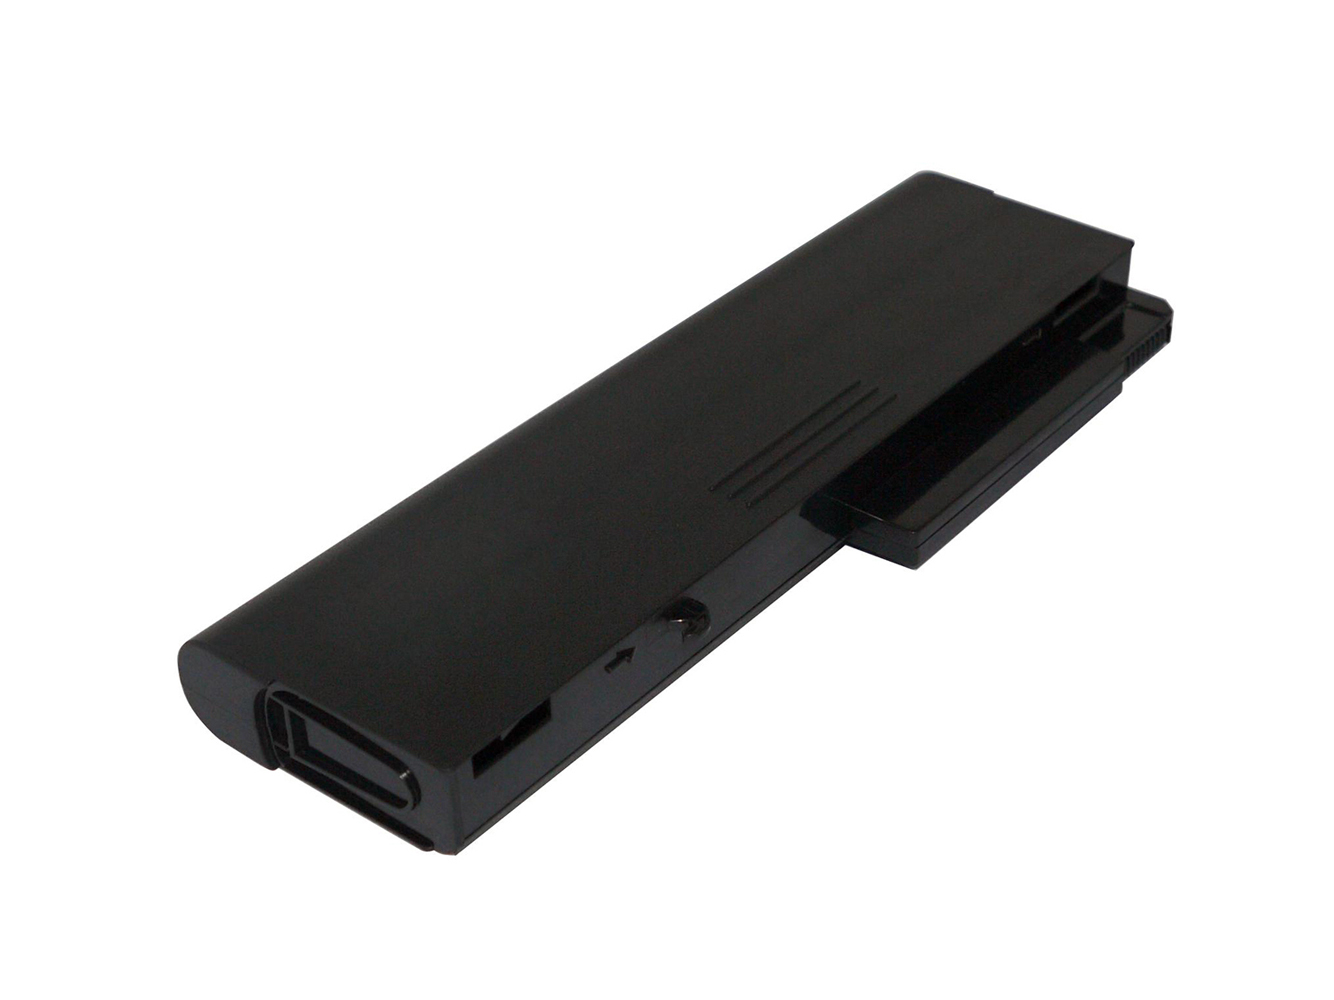 Replacement for HP COMPAQ Business Notebook 6530b, Business Notebook 6535b, Business Notebook 6730b, Business Notebook 6735b Laptop Battery